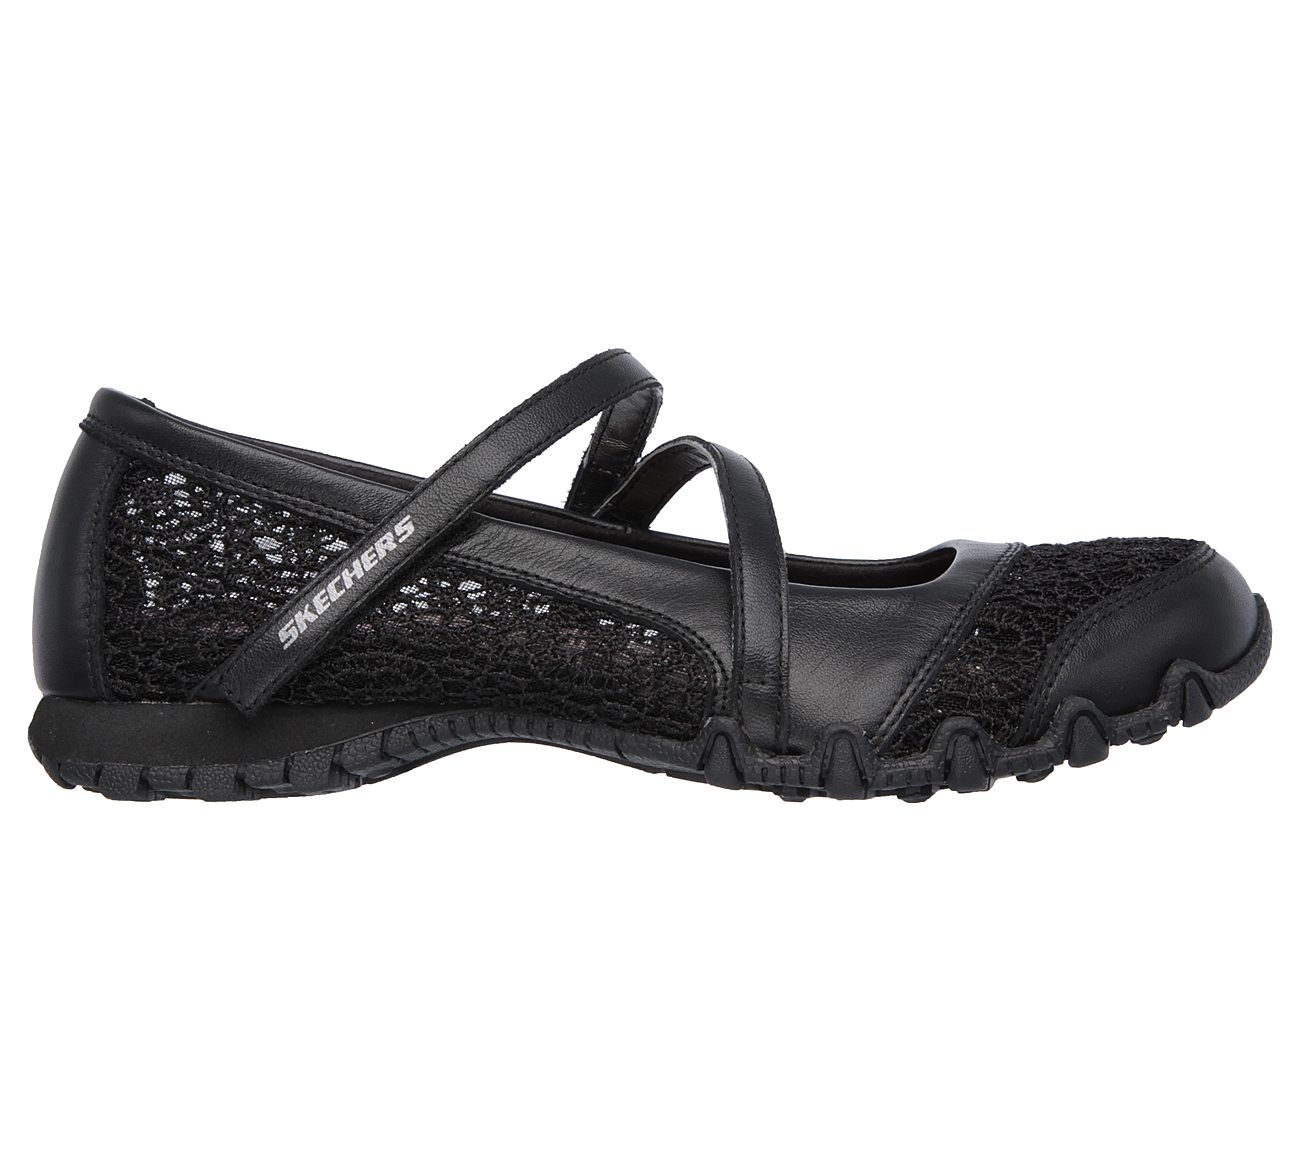 Clocked SKECHERS Relaxed Fit Shoes